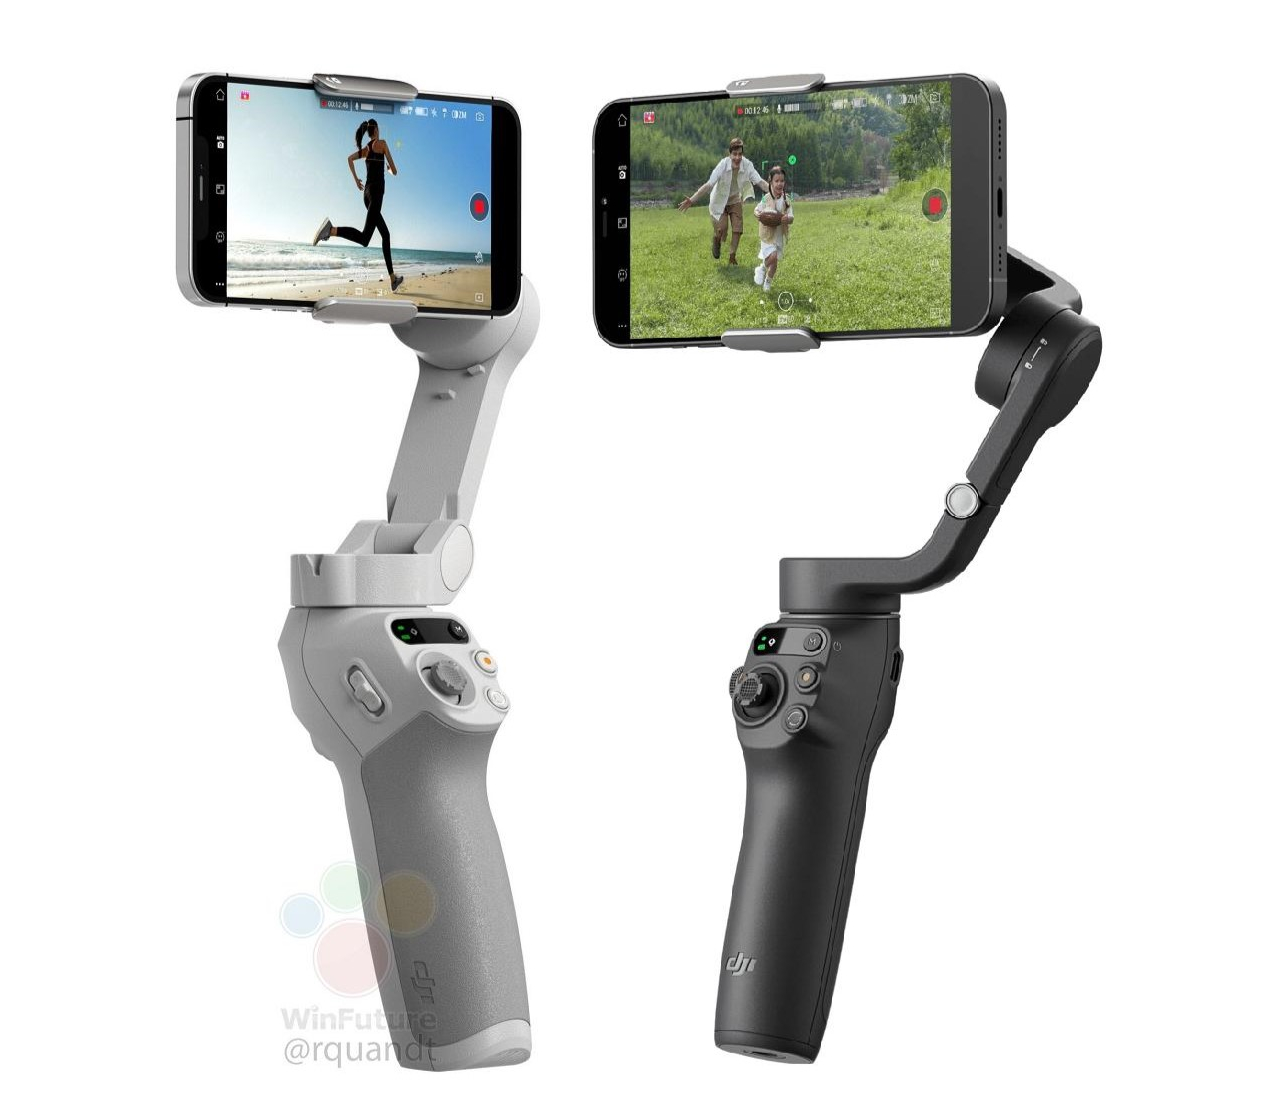 Først Fryse pasta DJI OM 6 and Osmo Mobile SE specifications and prices leak as 'Unfold Your  Creativity' launch event confirmed - NotebookCheck.net News